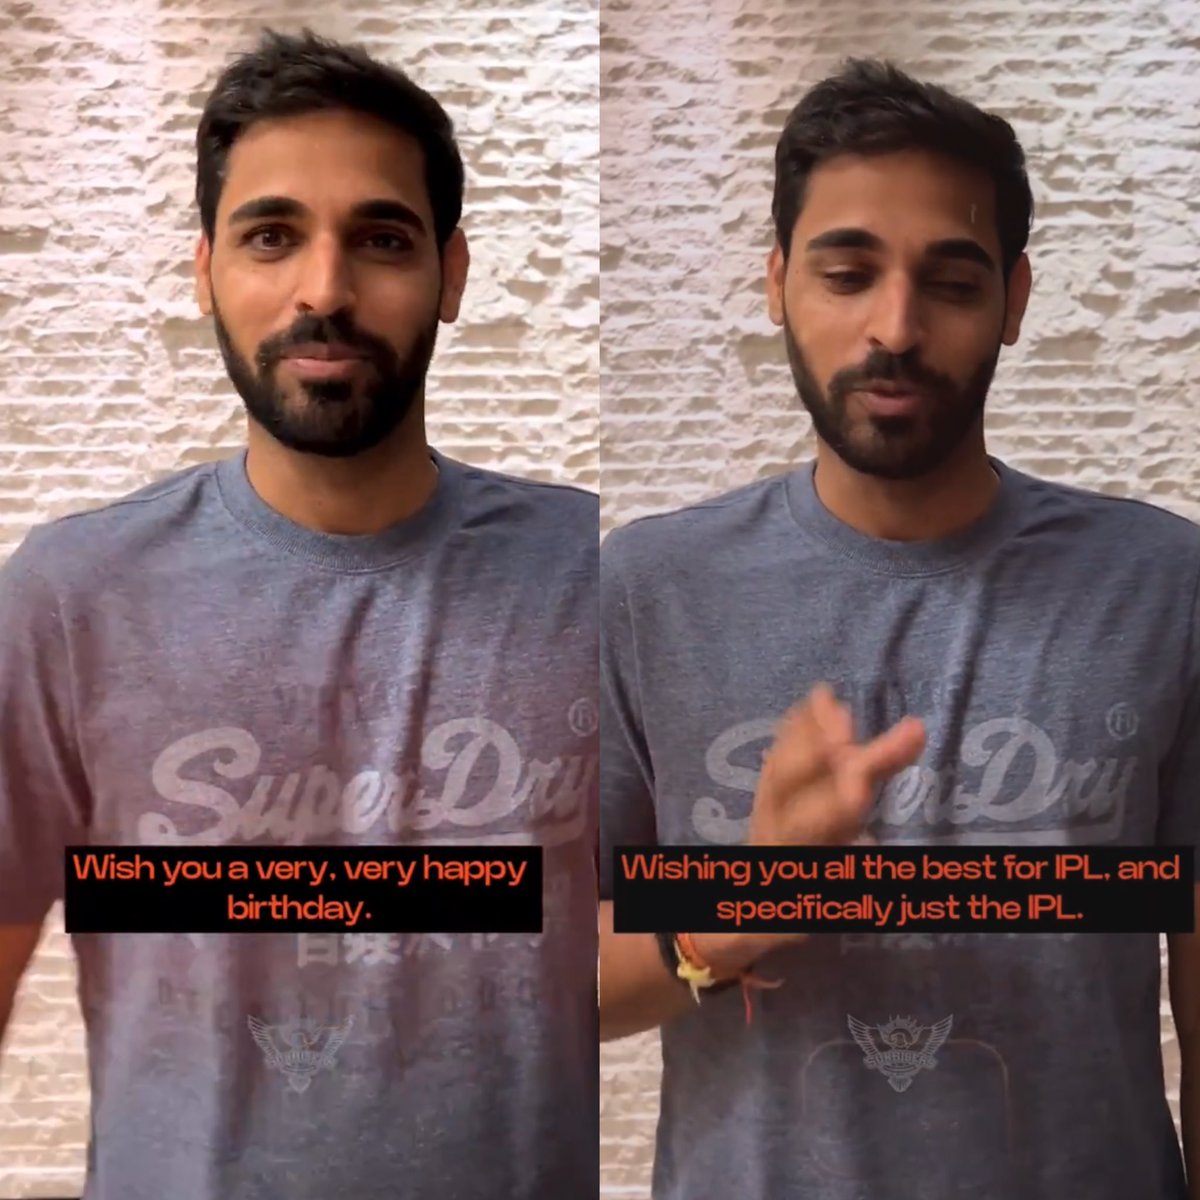 Bhuvi while wishing Pat Cummins for his birthday -

All the best for IPL and specifically just IPL 😂😂